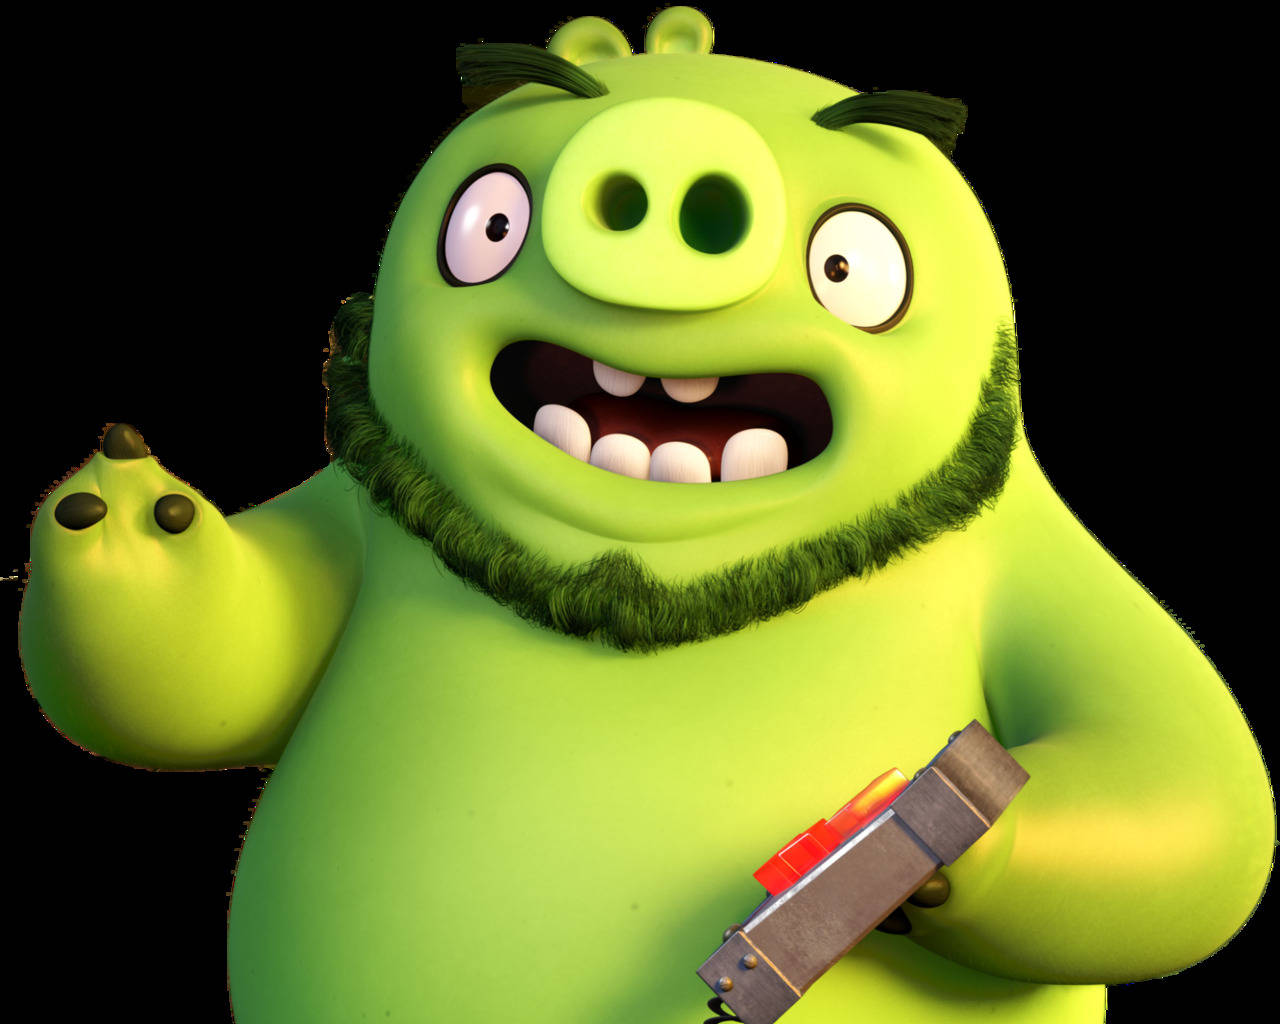 Green Pig From The Angry Birds Movie Wallpaper